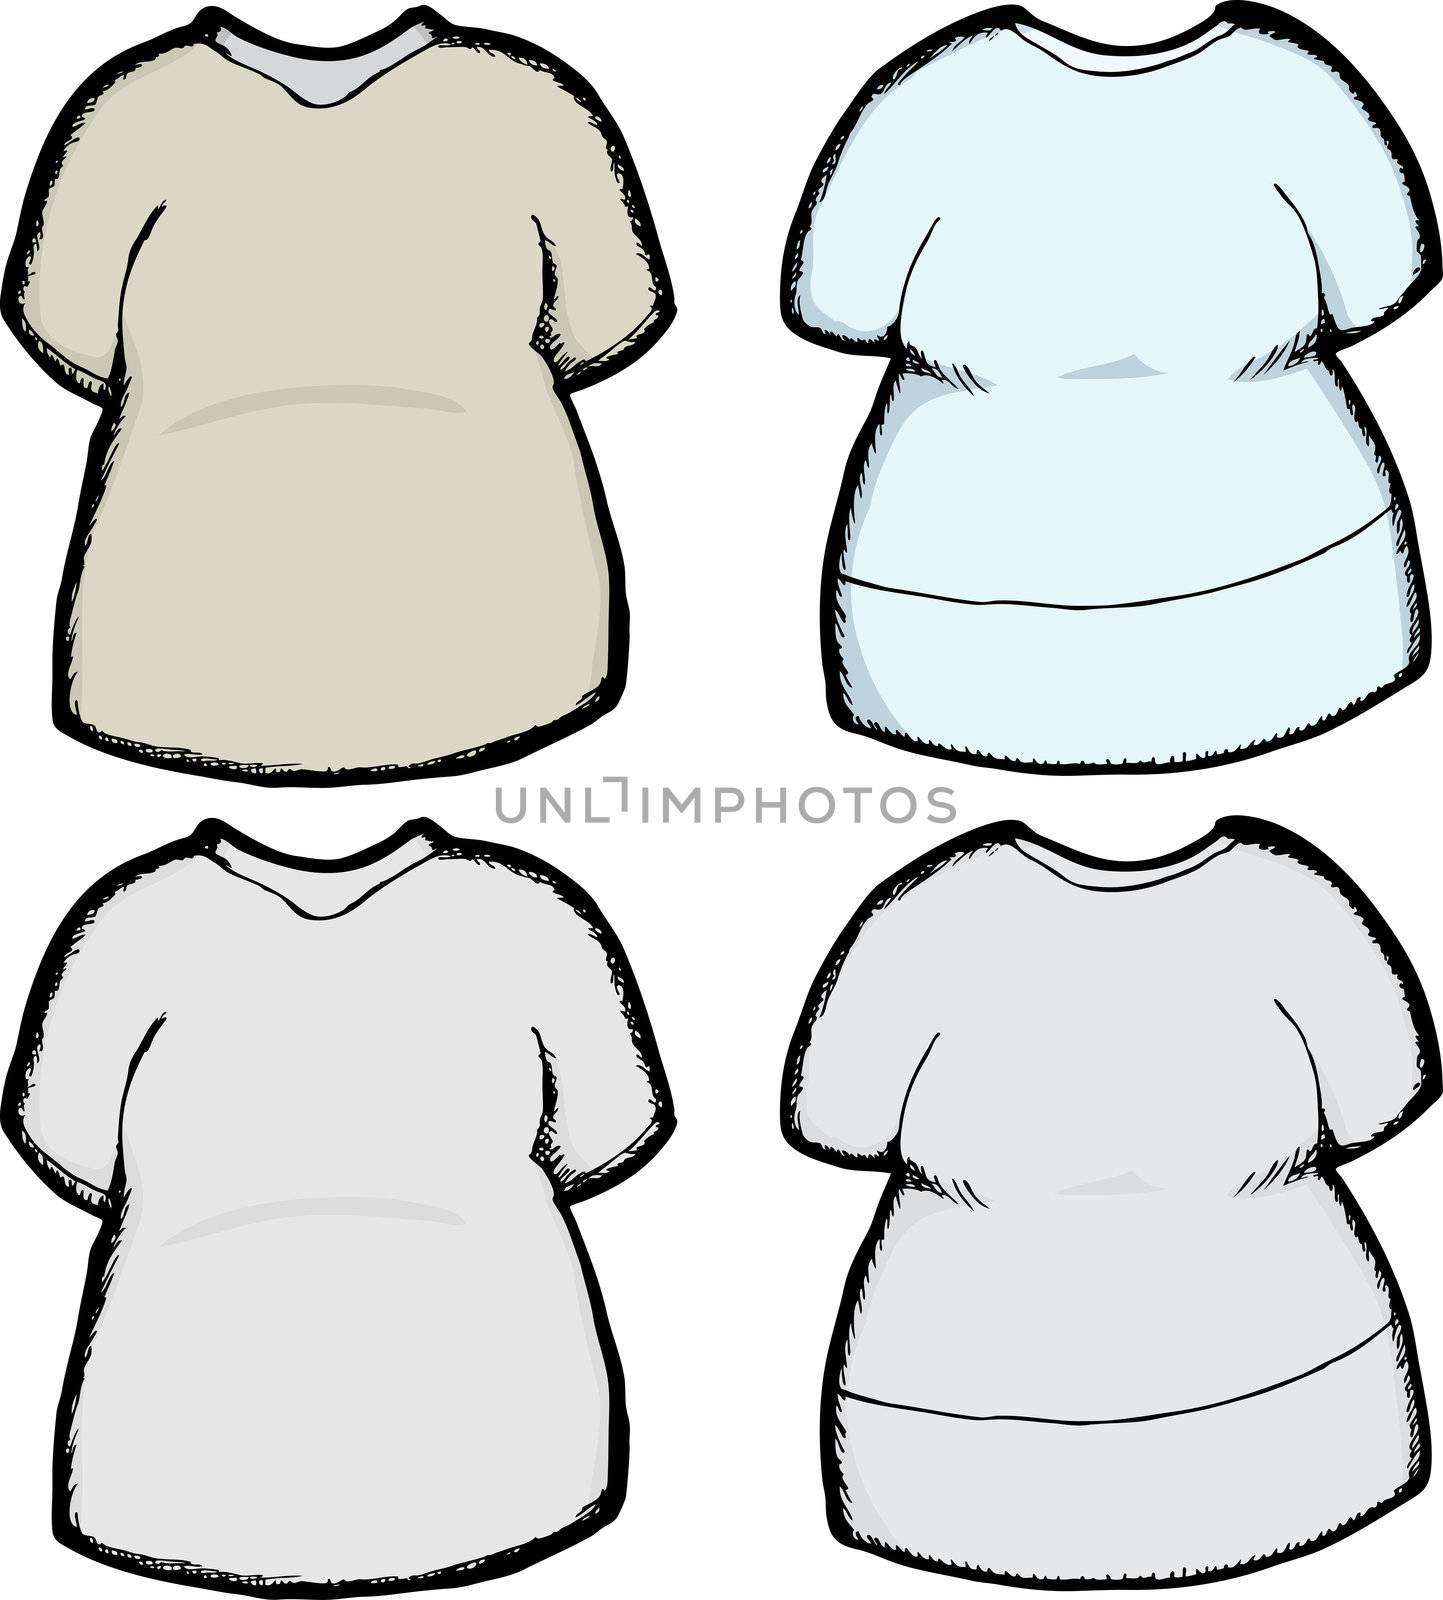 Male and female generic blank shirt template illustration